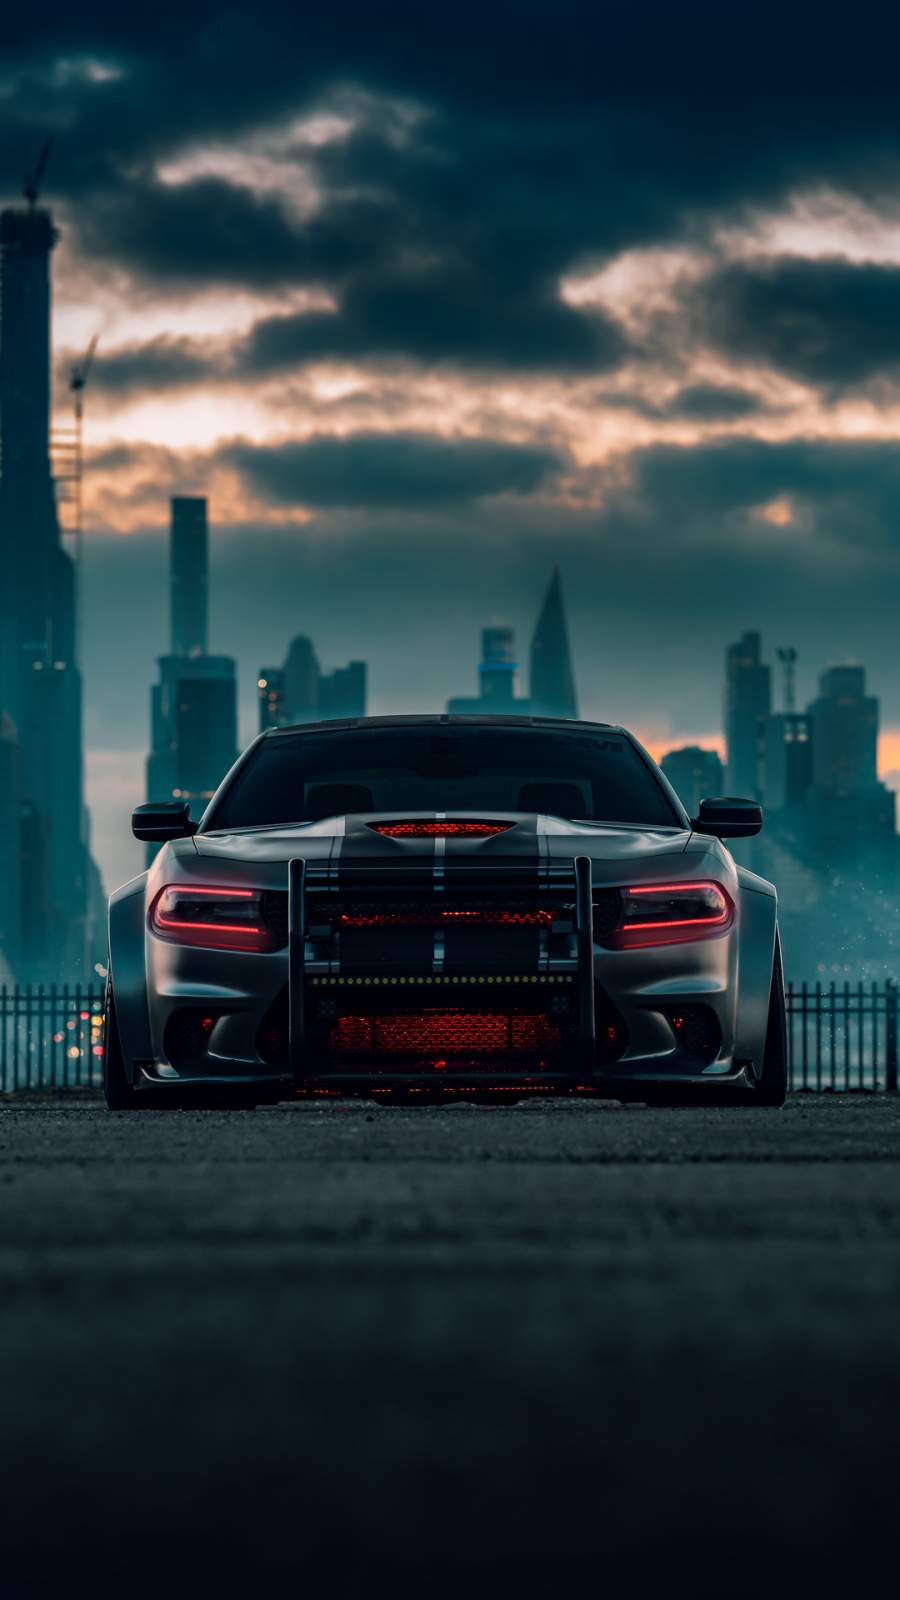 2011 Dodge Charger Wallpaper 4k Widescreen 1080p Hd Background Srt Picture  Background Image And Wallpaper for Free Download